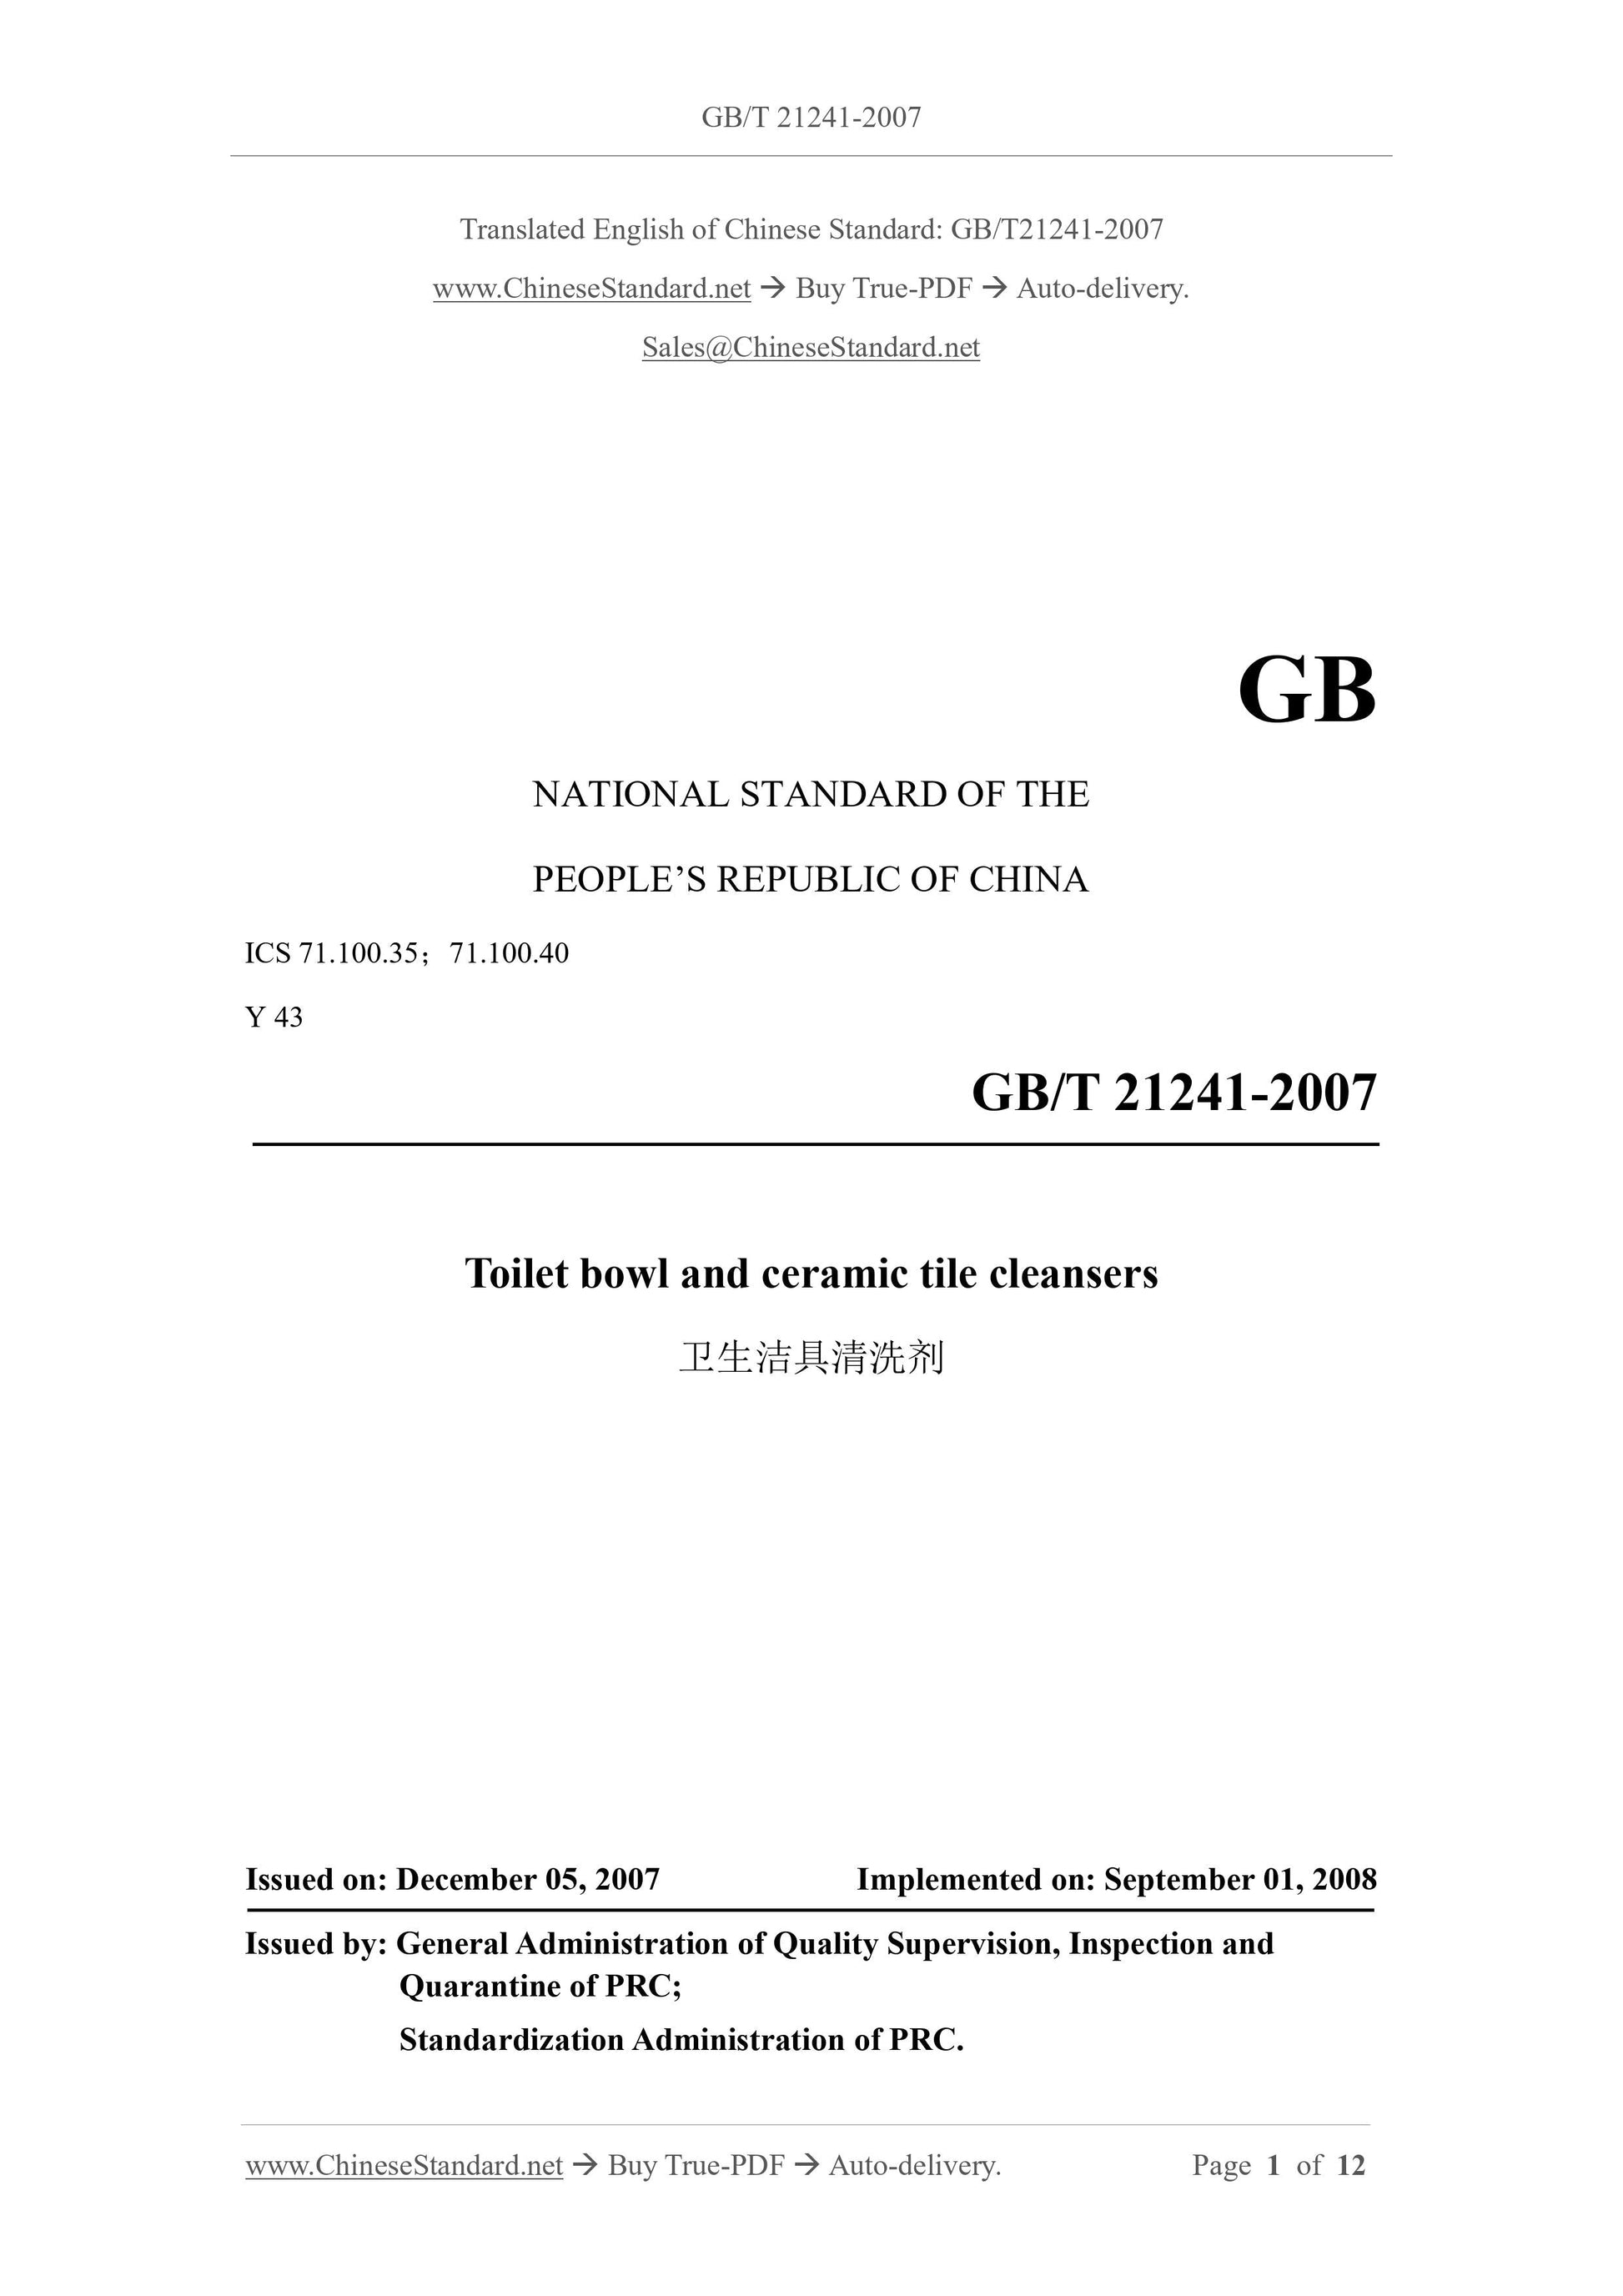 GB/T 21241-2007 Page 1